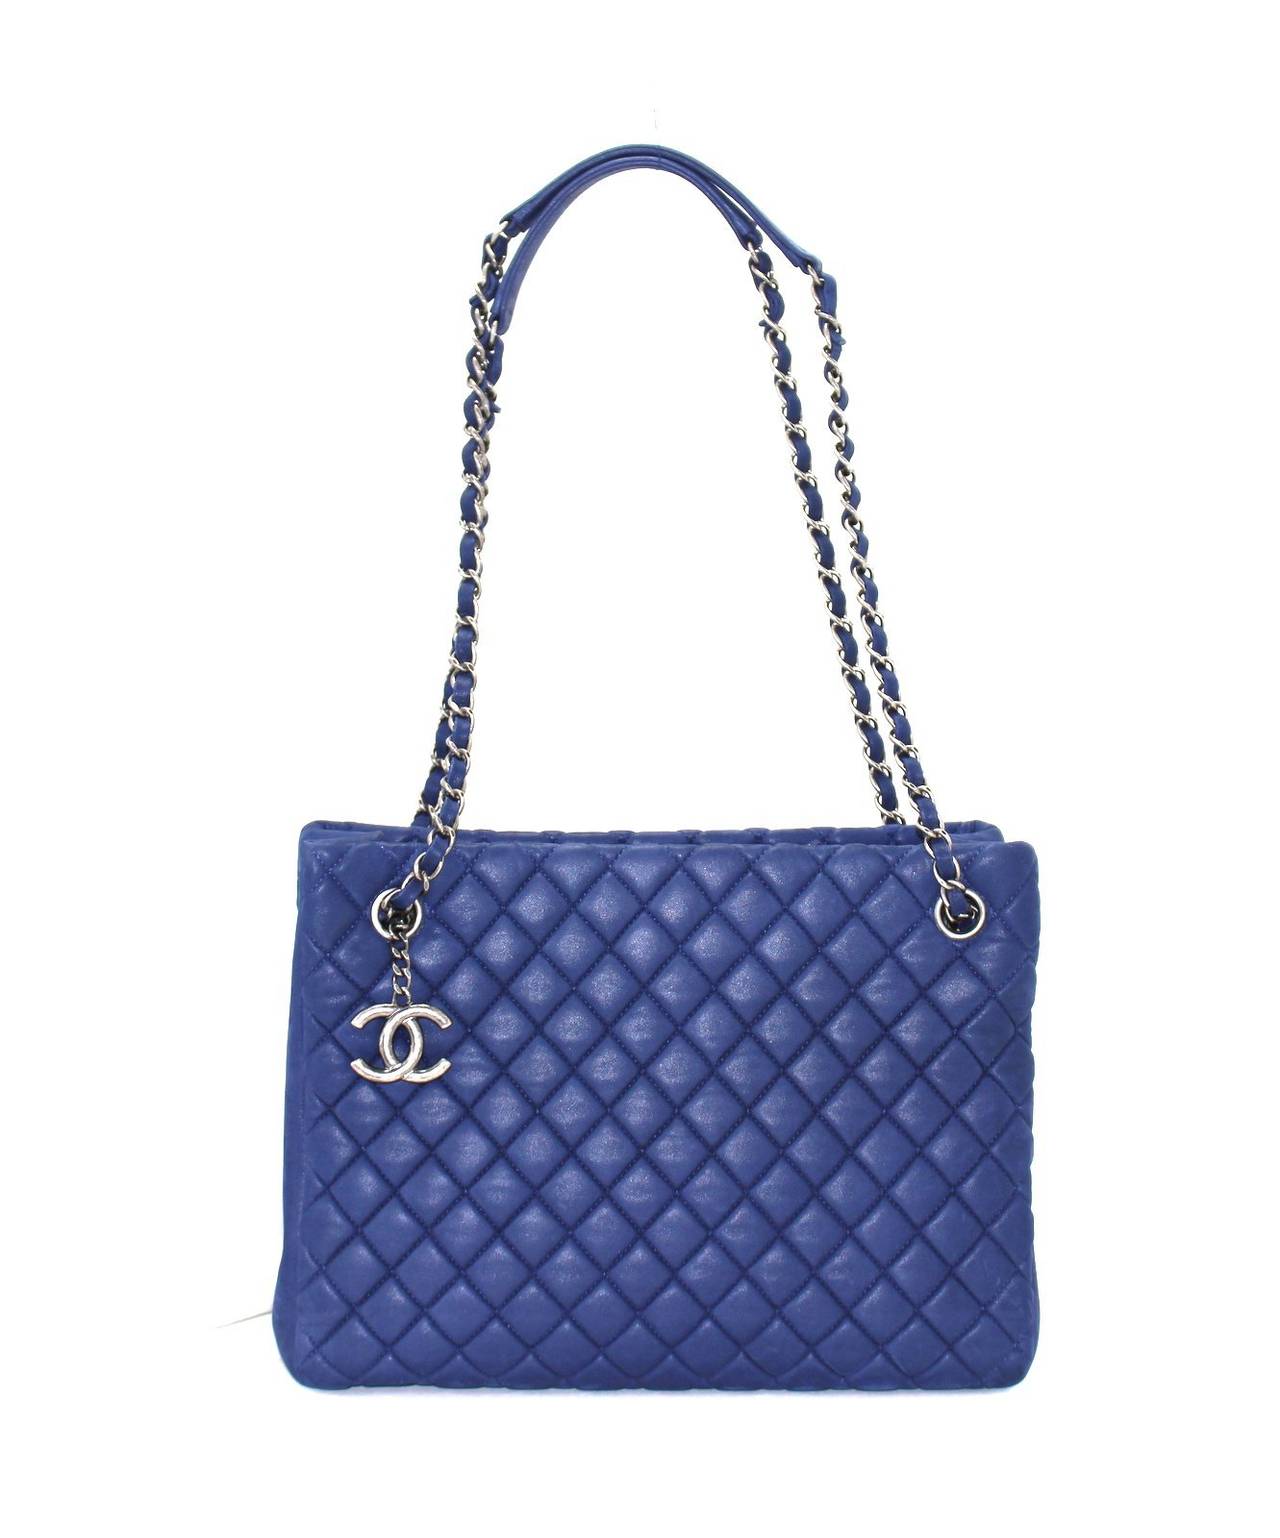 Chanel Cobalt Blue Leather Tote 5